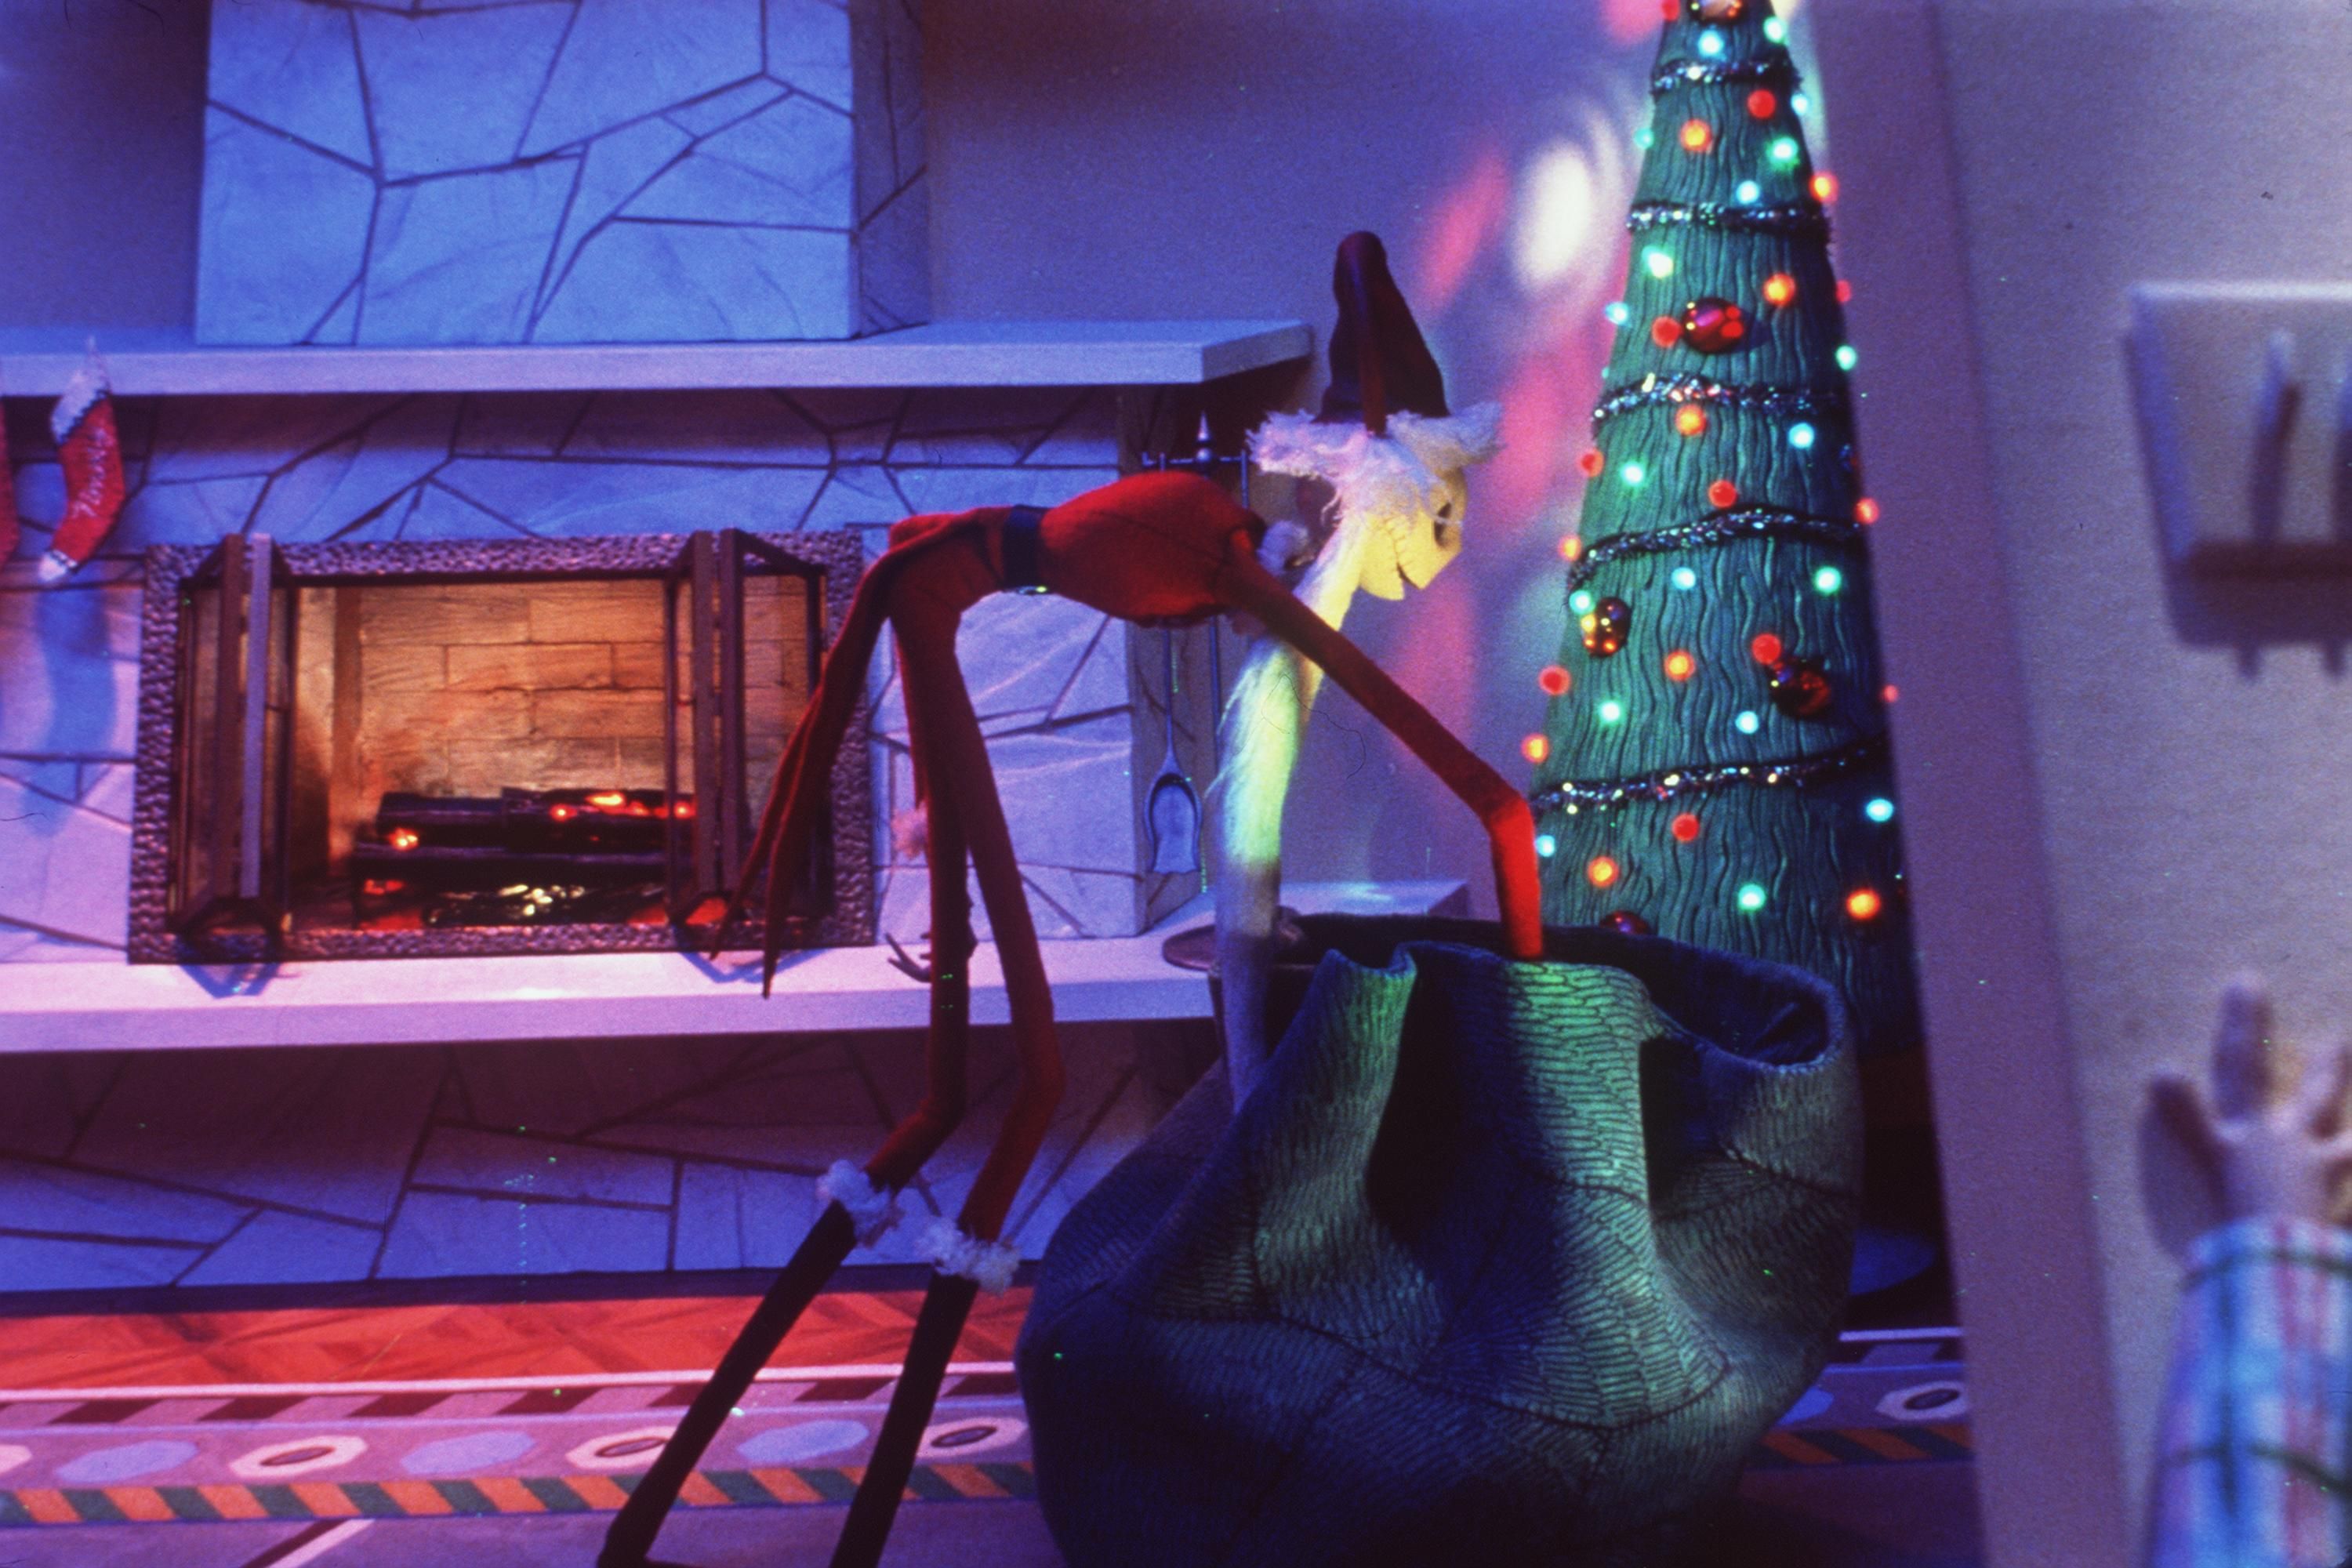 Why The Nightmare Before Christmas Isn't a Halloween Movie